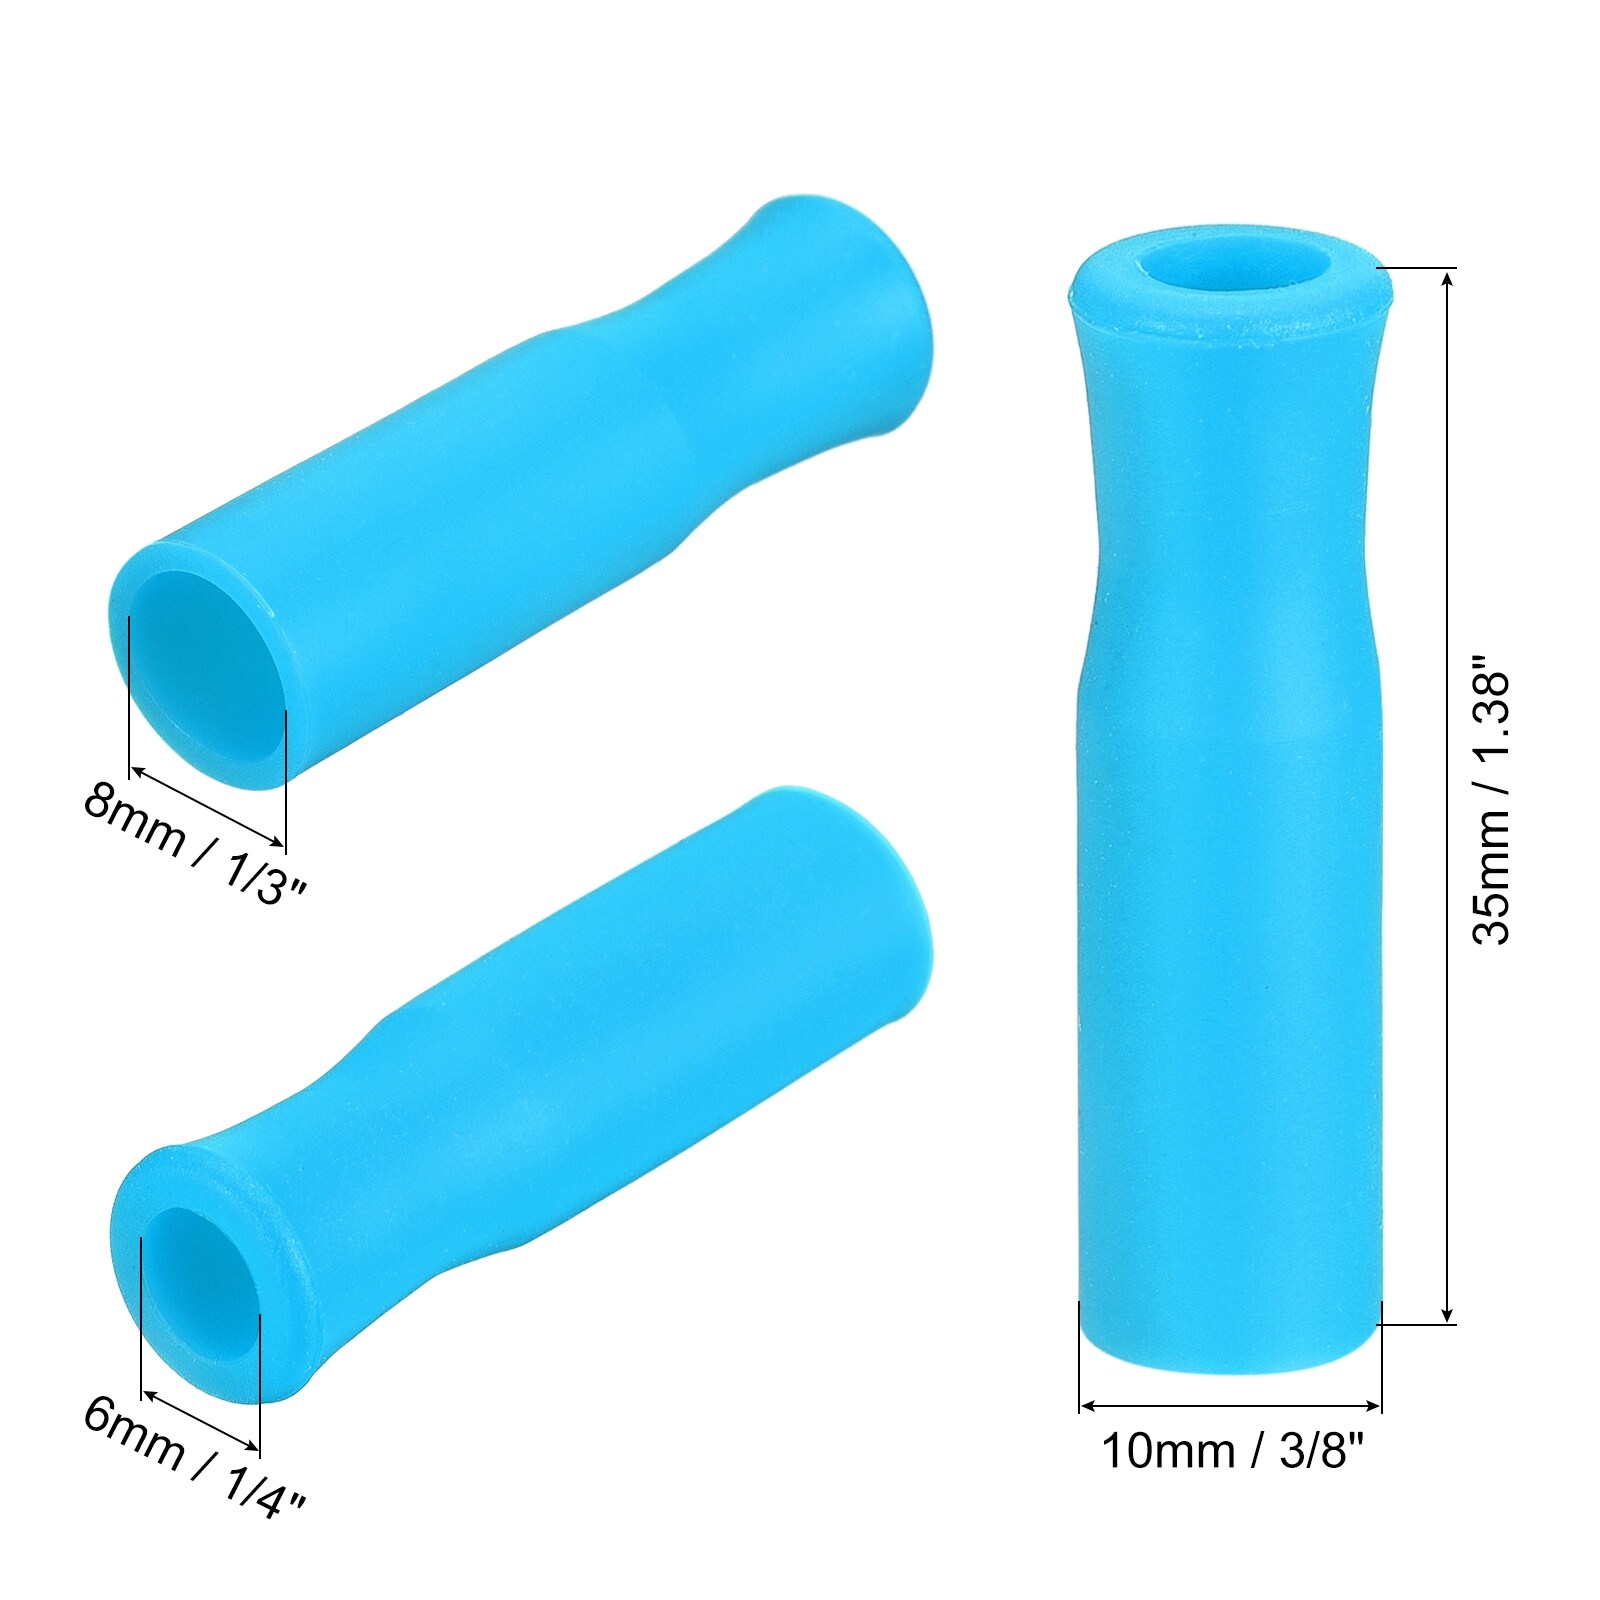 https://ak1.ostkcdn.com/images/products/is/images/direct/48ee7139d3af3b032722af939ea08e3e47c52fda/12pcs-Silicone-Straw-Tips-for-Stainless-Steel-Straws.jpg